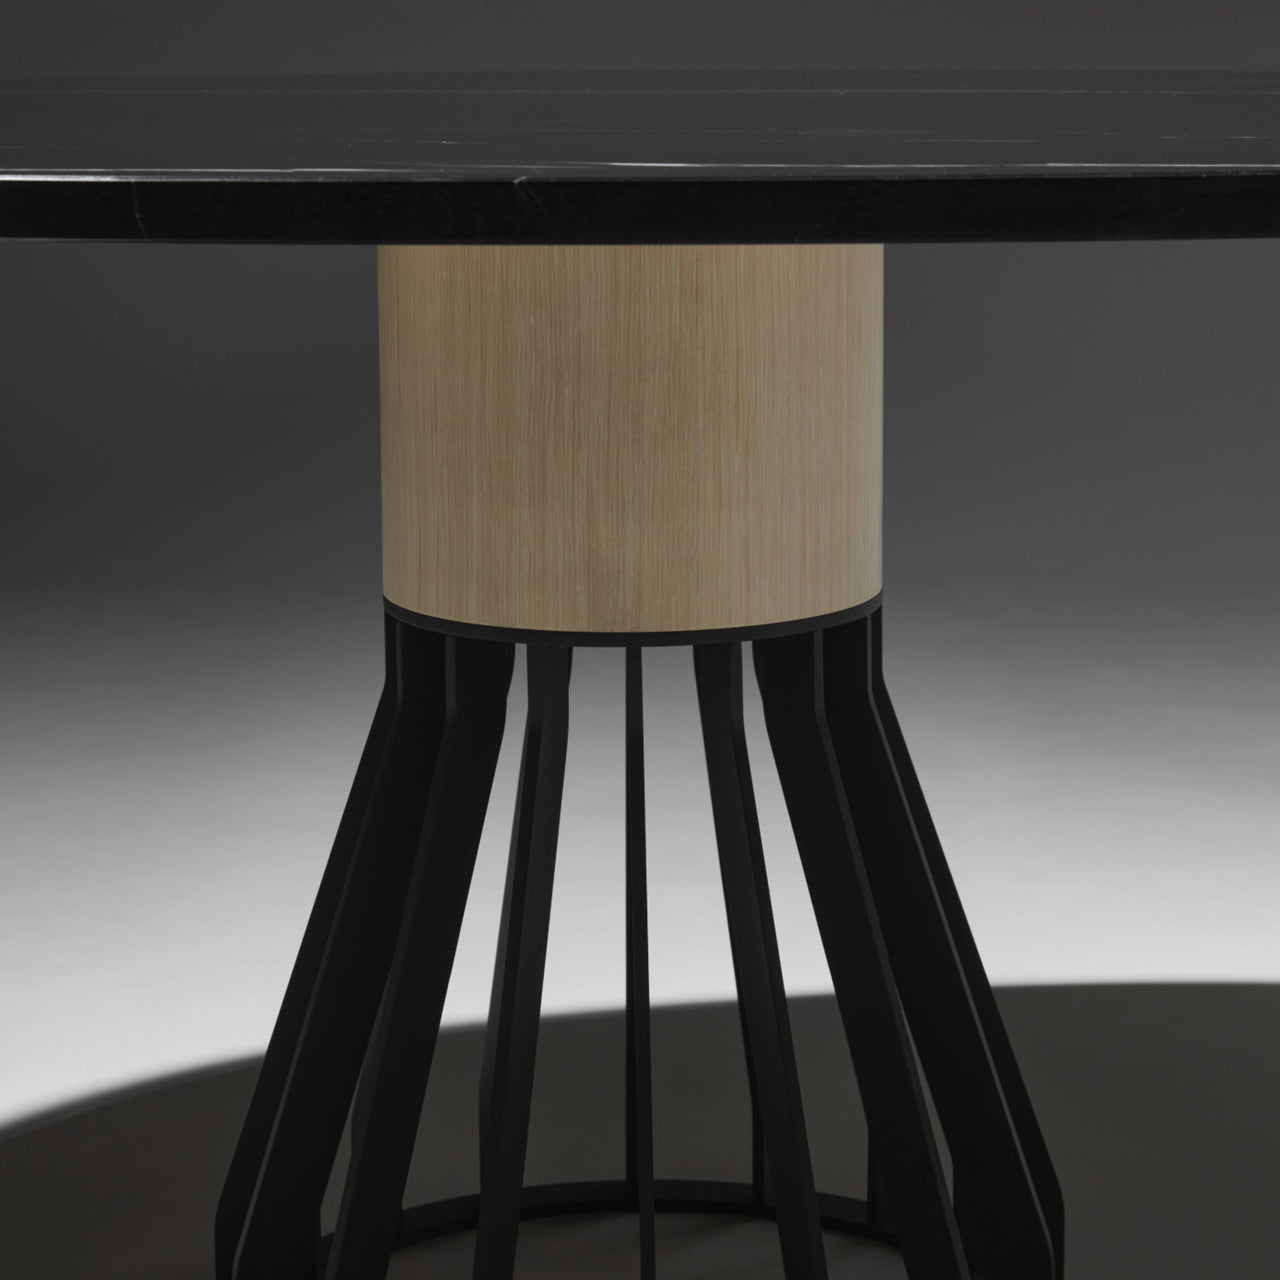 Mewoma Dining Table: Oblong